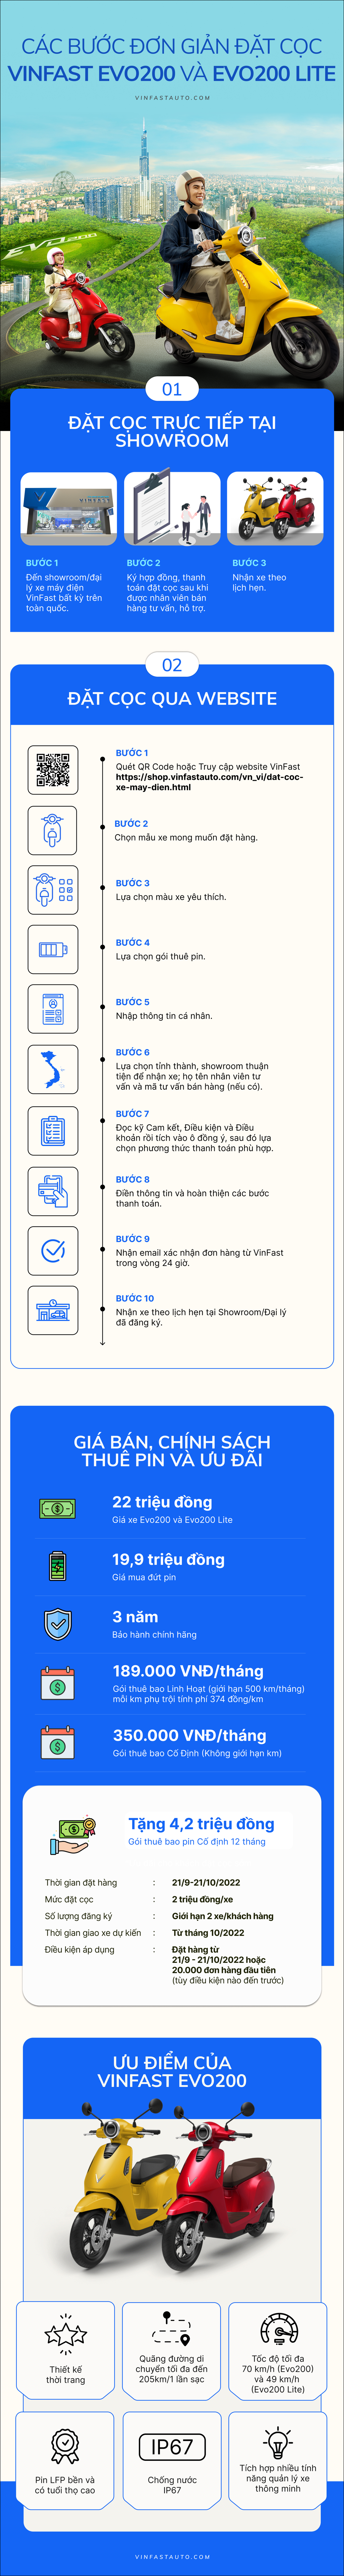 infographic 2 cach don gian de ring ngay xe may dien quoc dan vinfast evo200 ve nha hinh 1